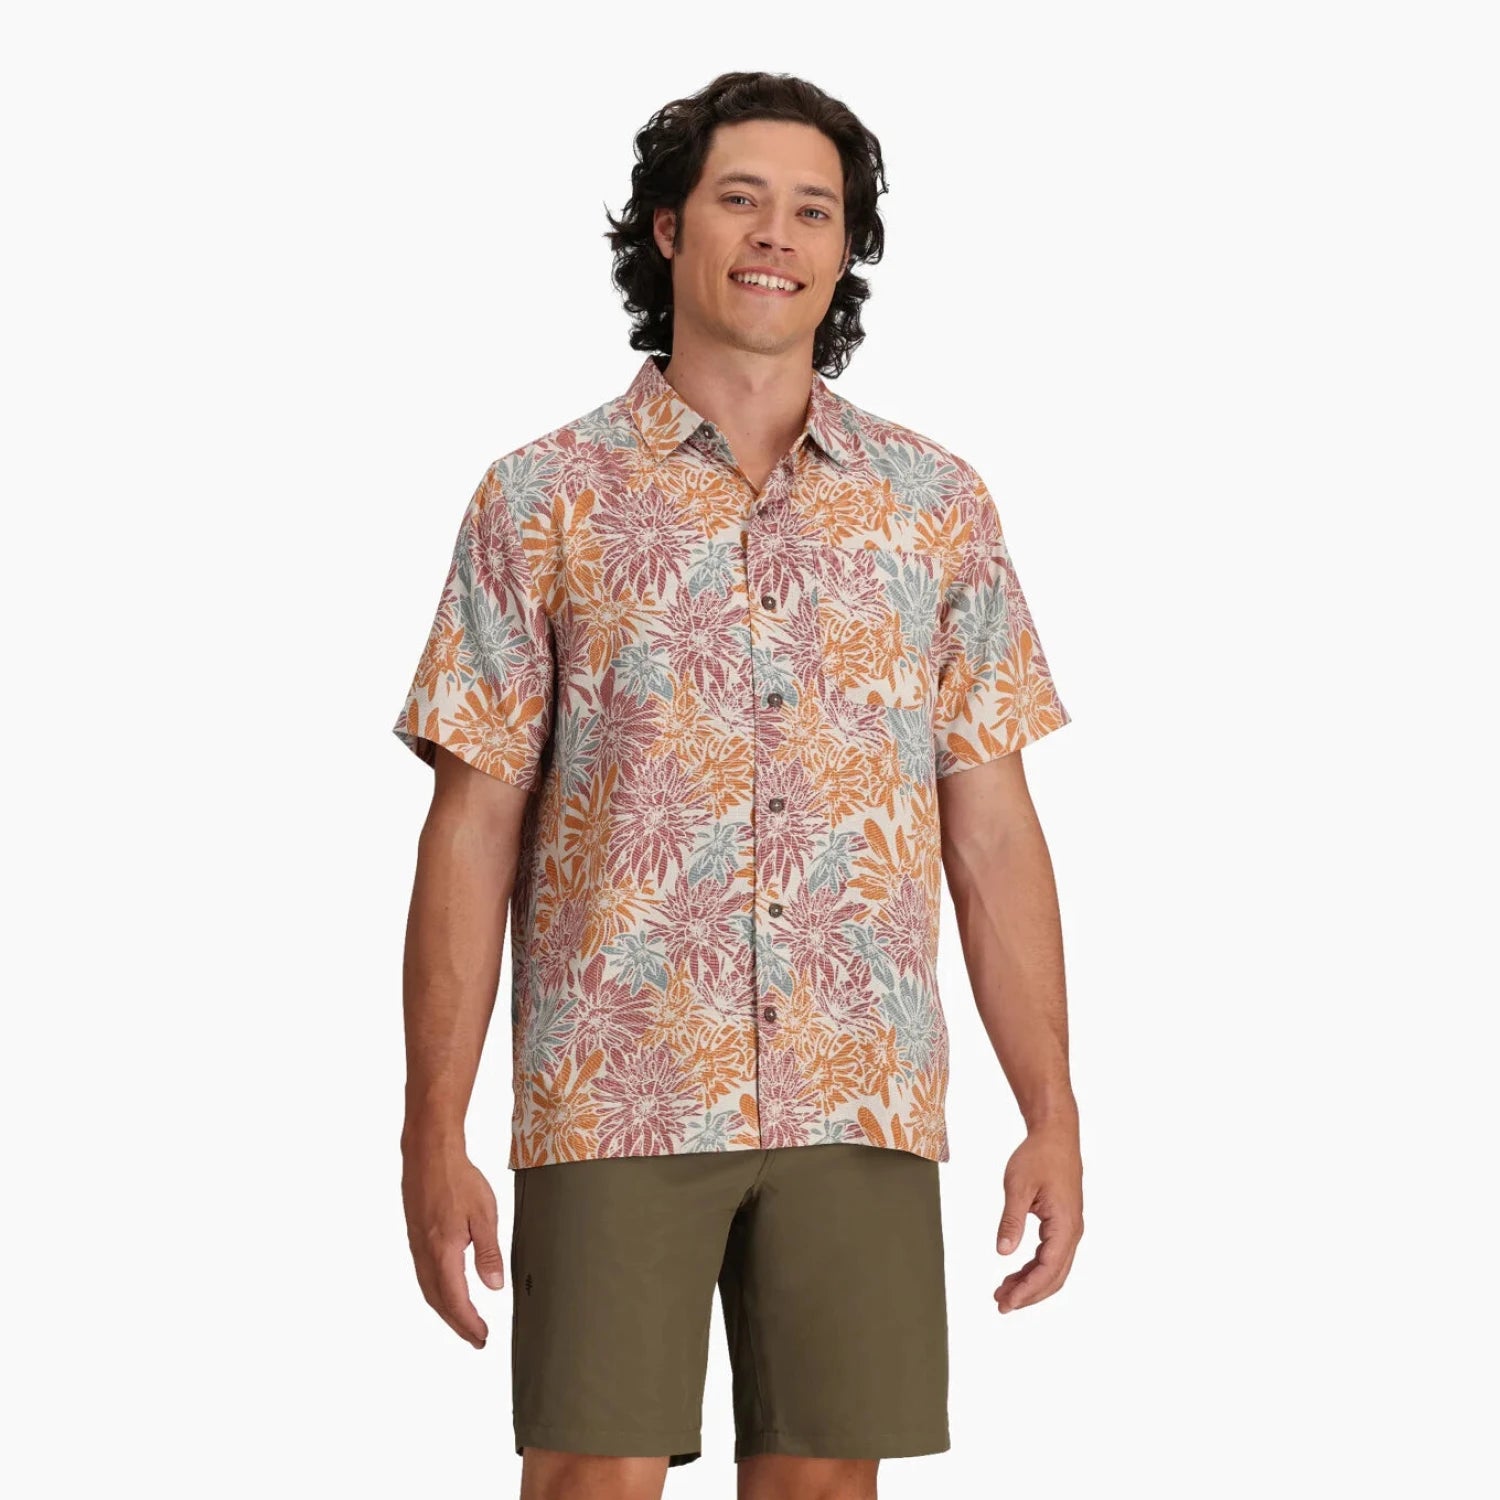 Royal Robbins M's Comino Leaf Short Sleeve, Baked Clay Bonsall, front view on model 